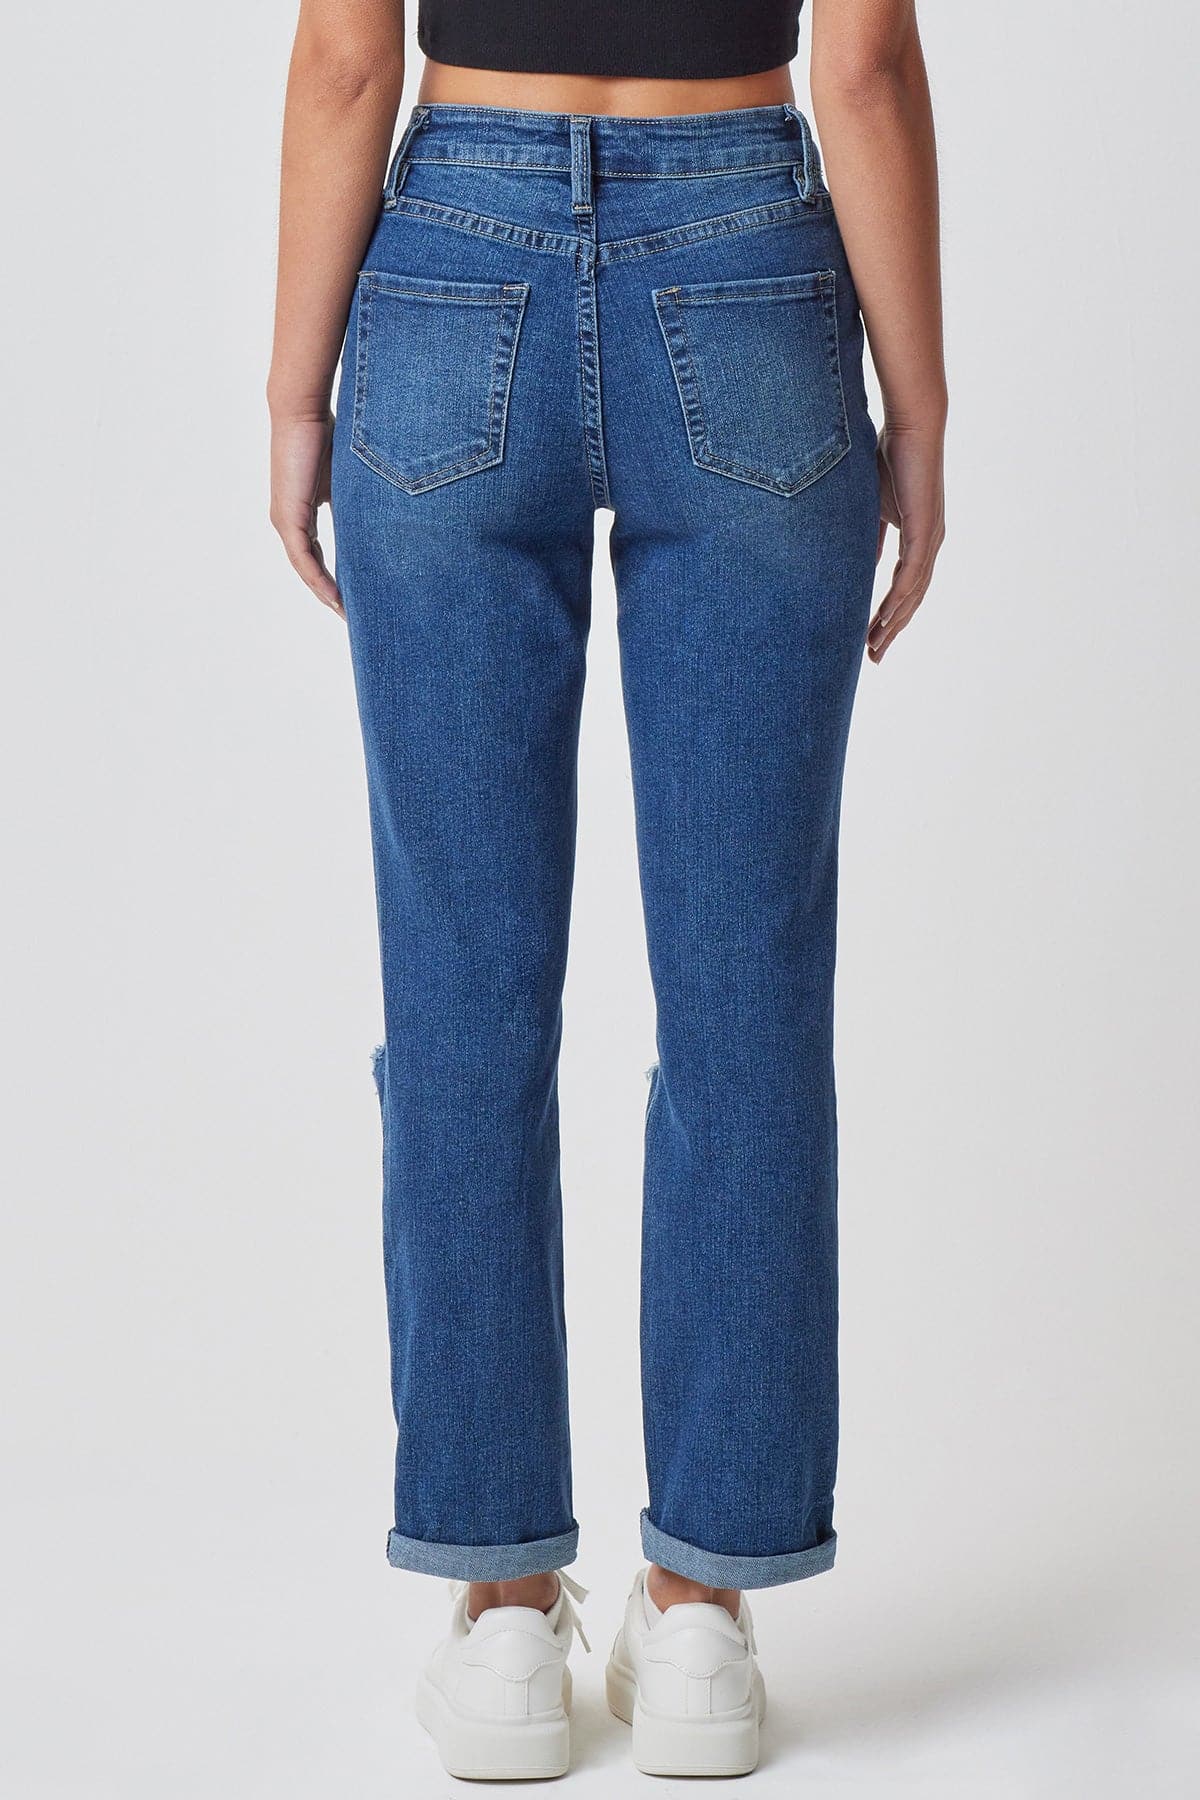 Women's Hybrid Dream Mom Fit Ankle Jeans